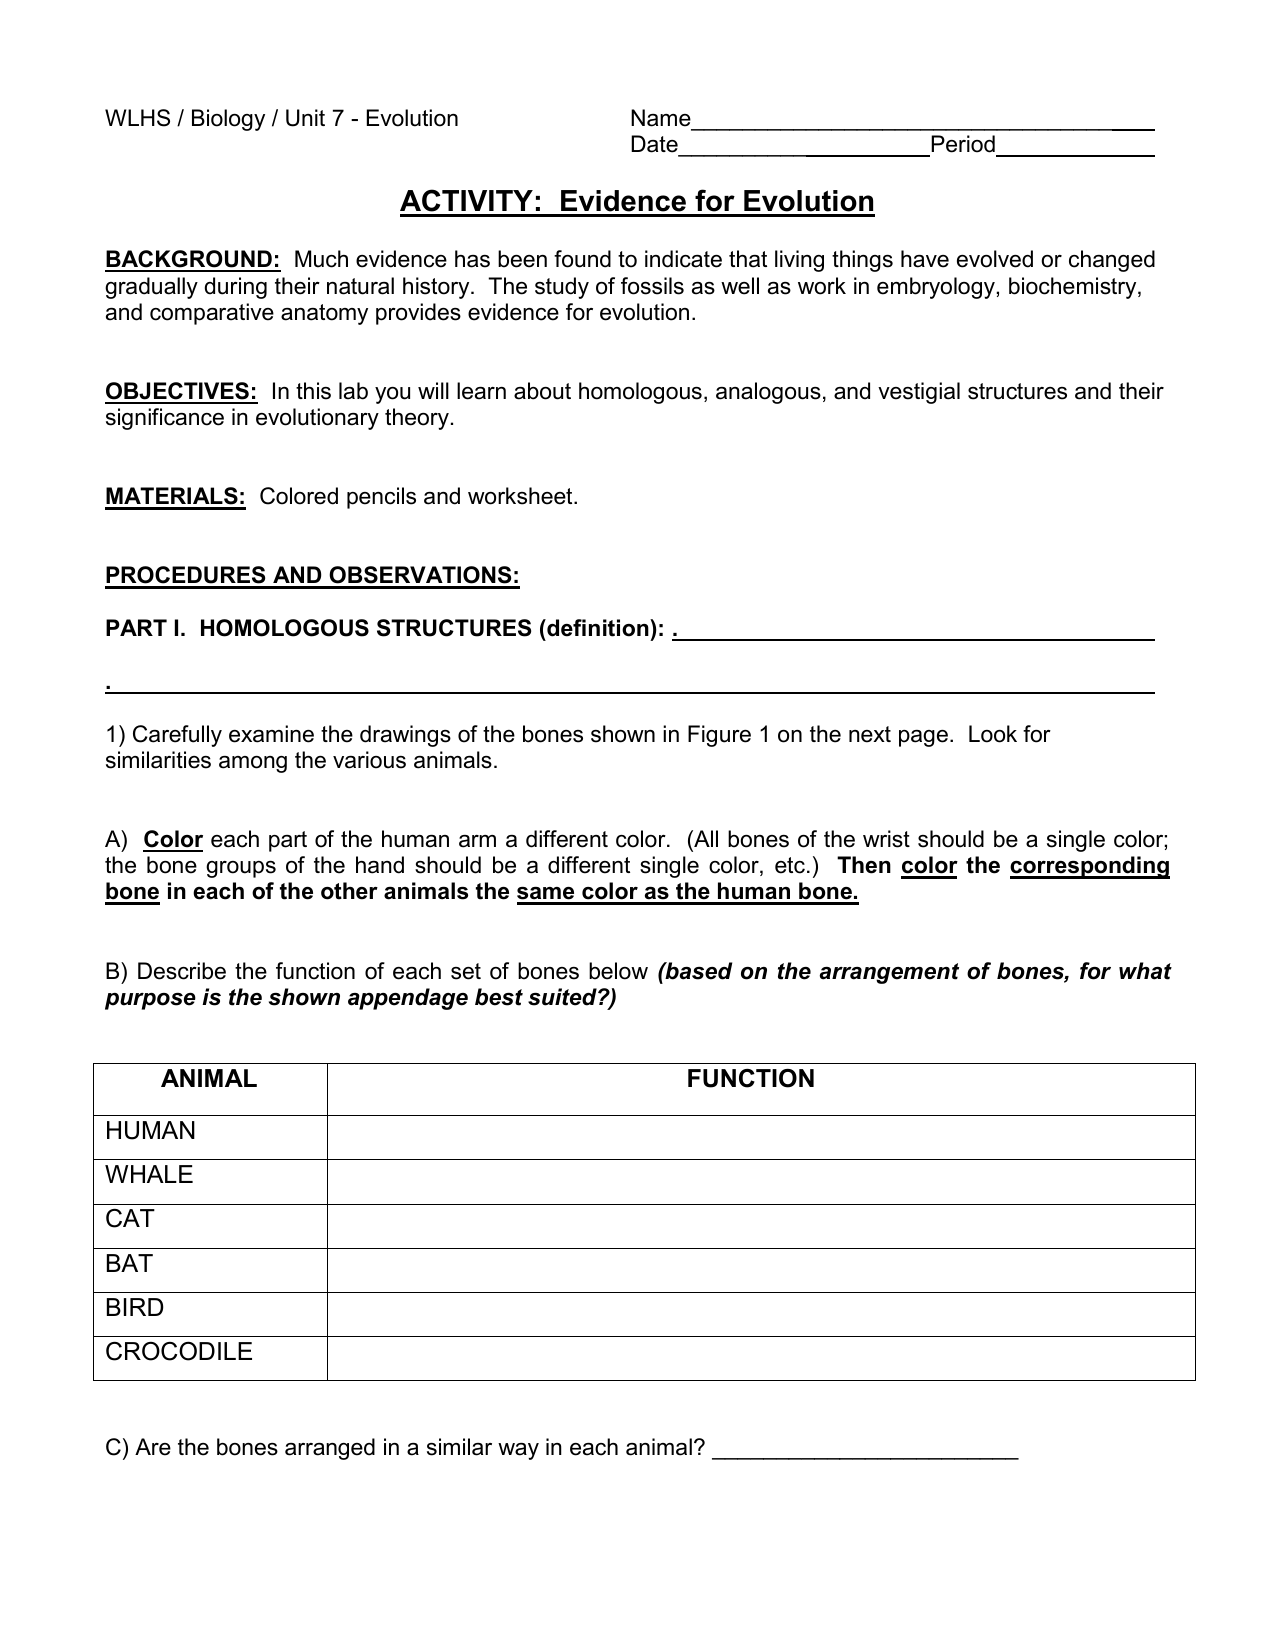 ACTIVITY: Evidence for Evolution With Evidence Of Evolution Worksheet Answers